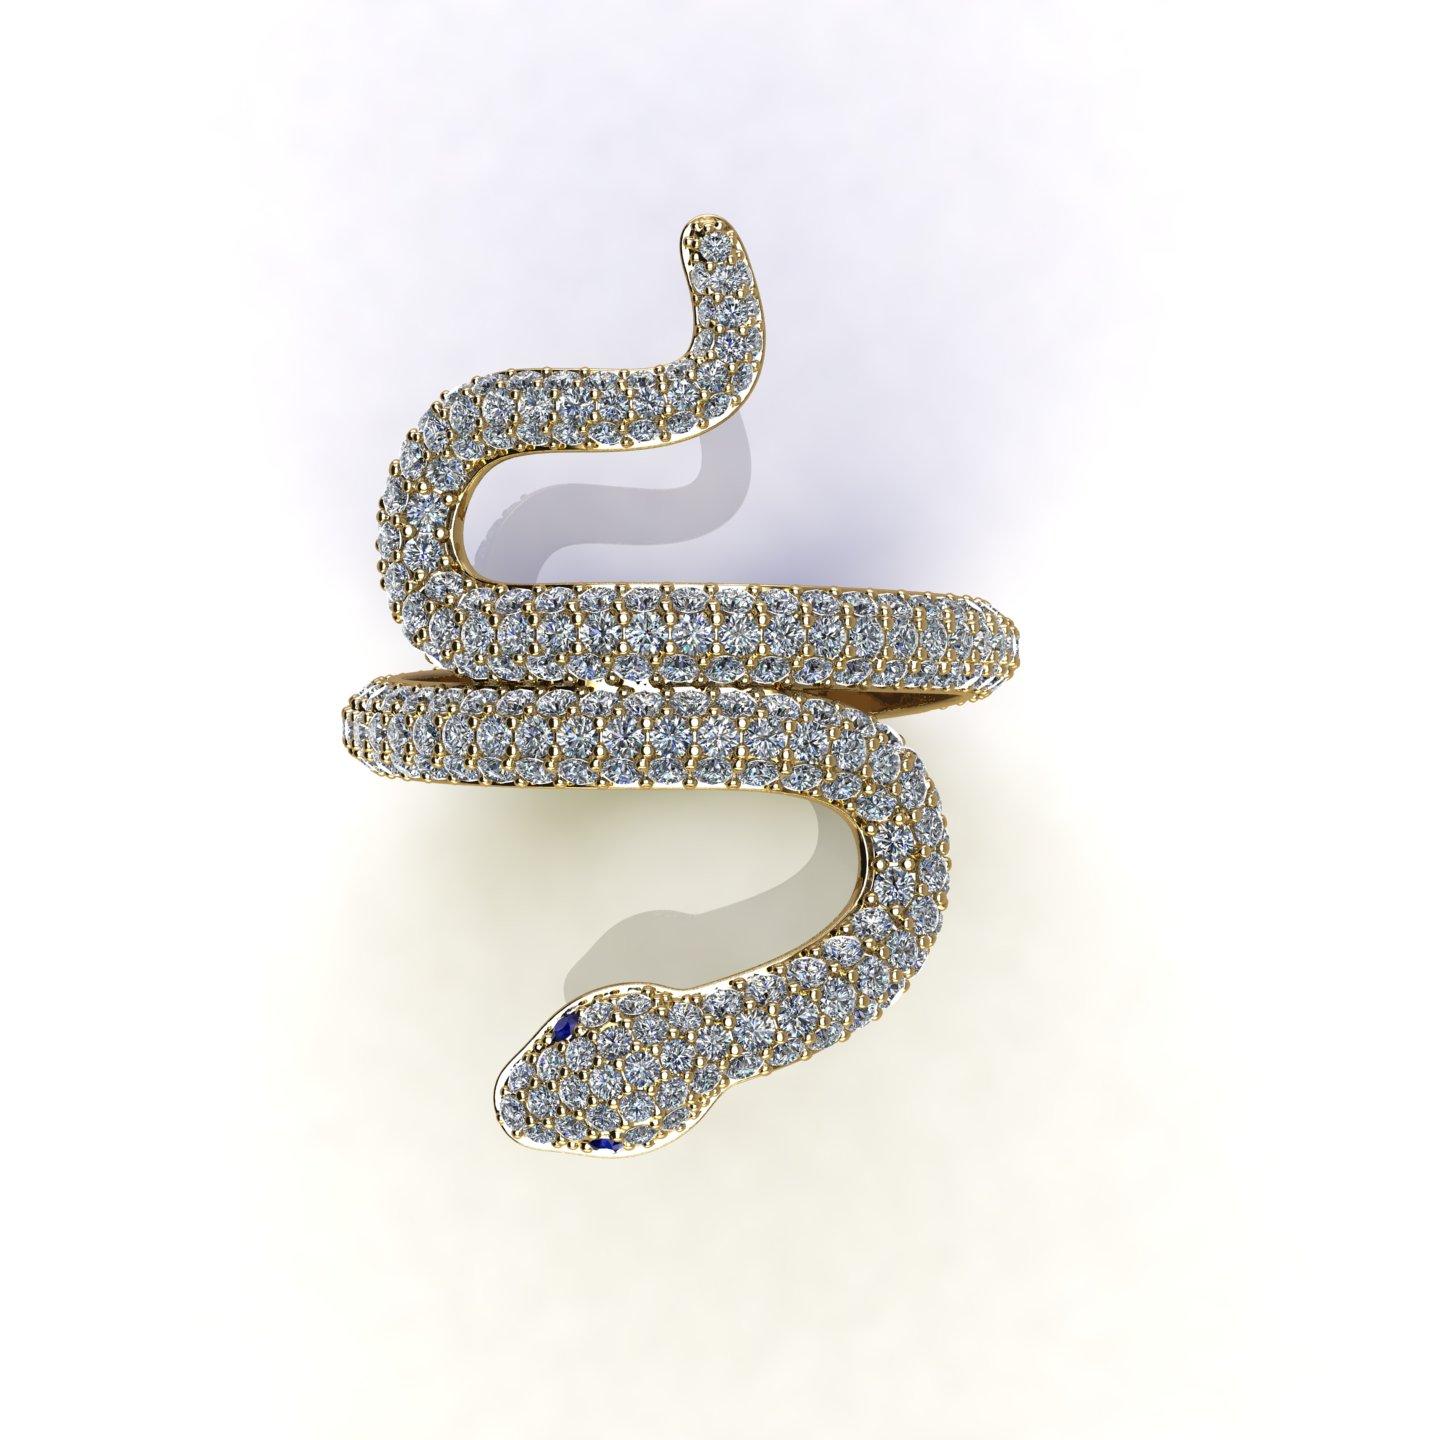 1.35ct Diamond Snake 14k yellow gold ring
Bright hand picked Diamonds, G/H color and VS clarity, of fine cut, made in 14k Yellow gold to help the slim design have more robustness.
Made to order in your finger size, due to the fitting in relation to